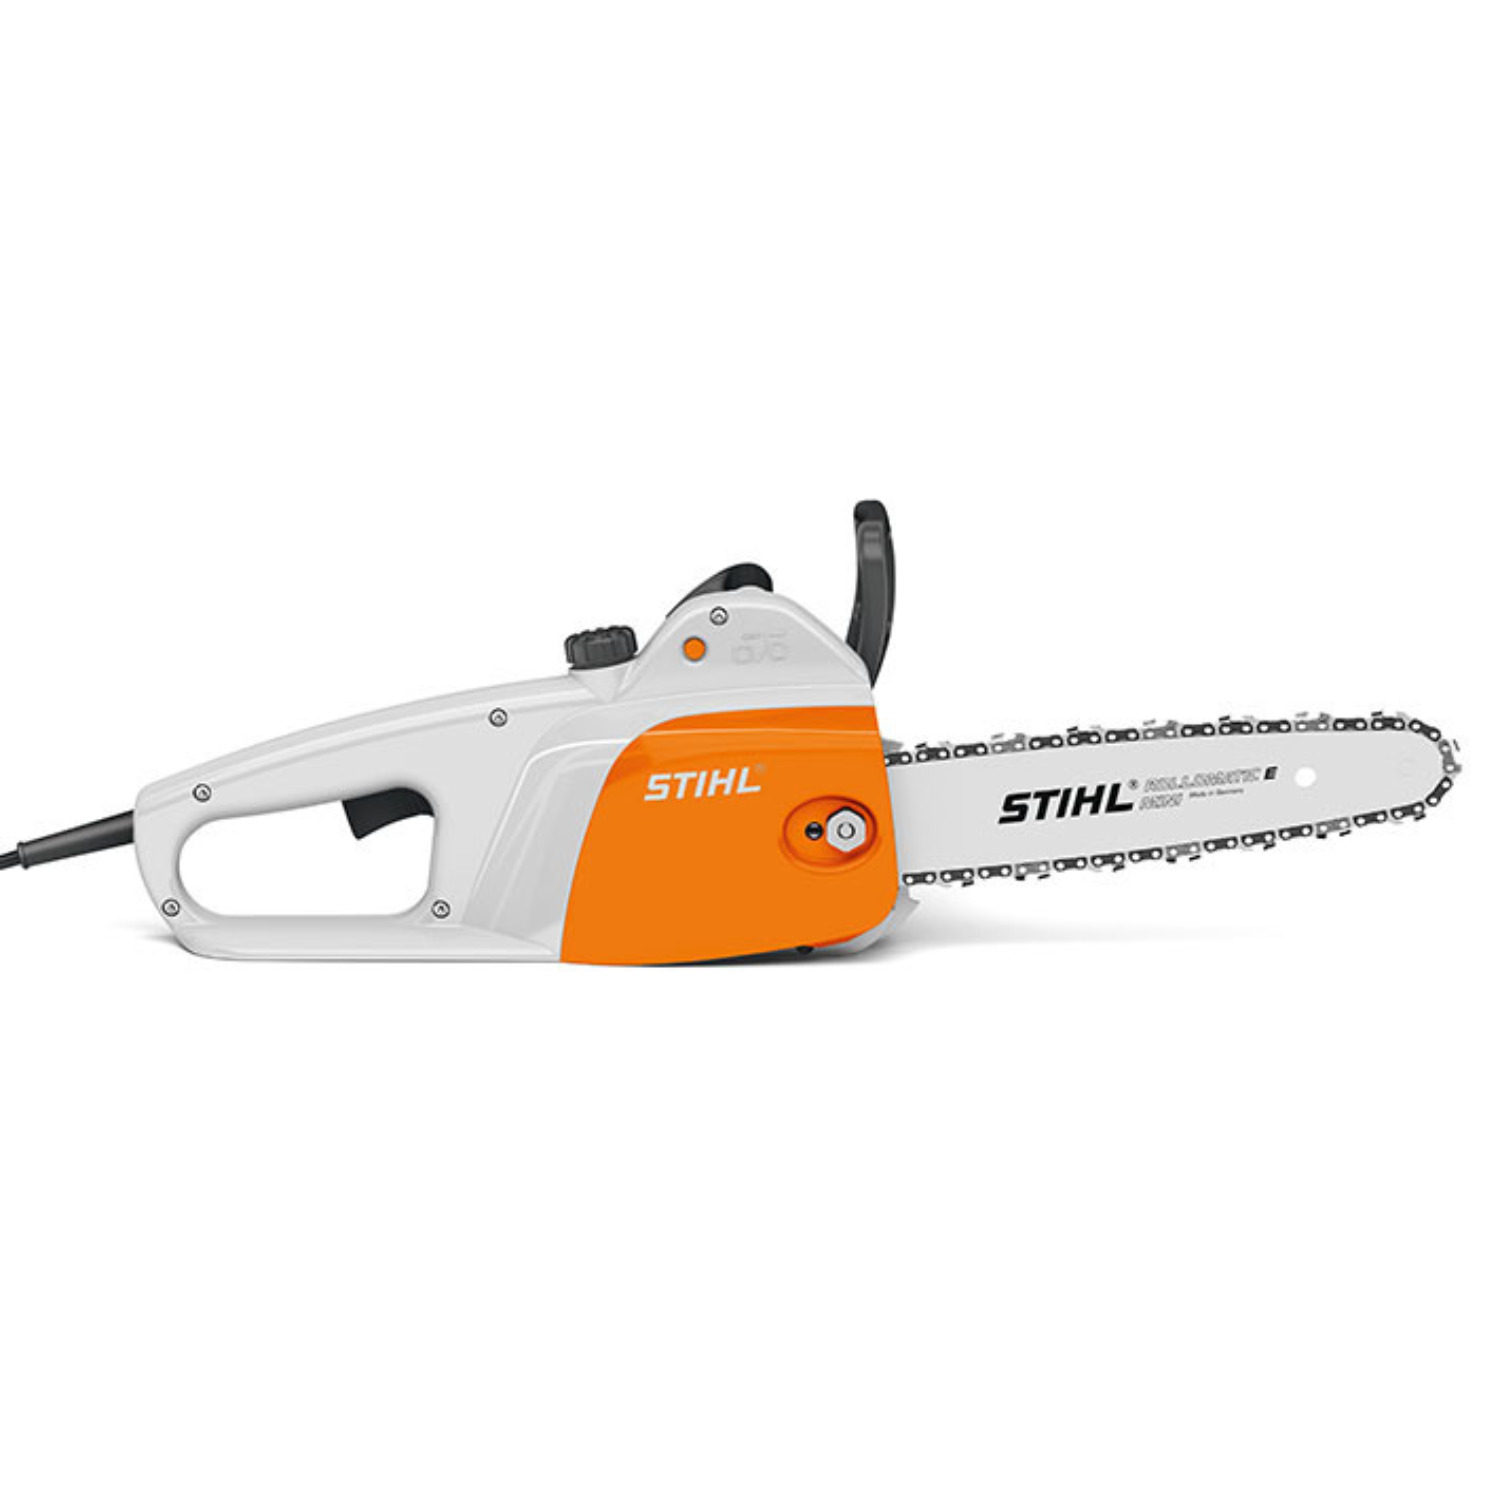 MOTOSIERRA ELECTRICA STIHL MSE 170 C TUTORIAL UNBOXING Y REVIEW